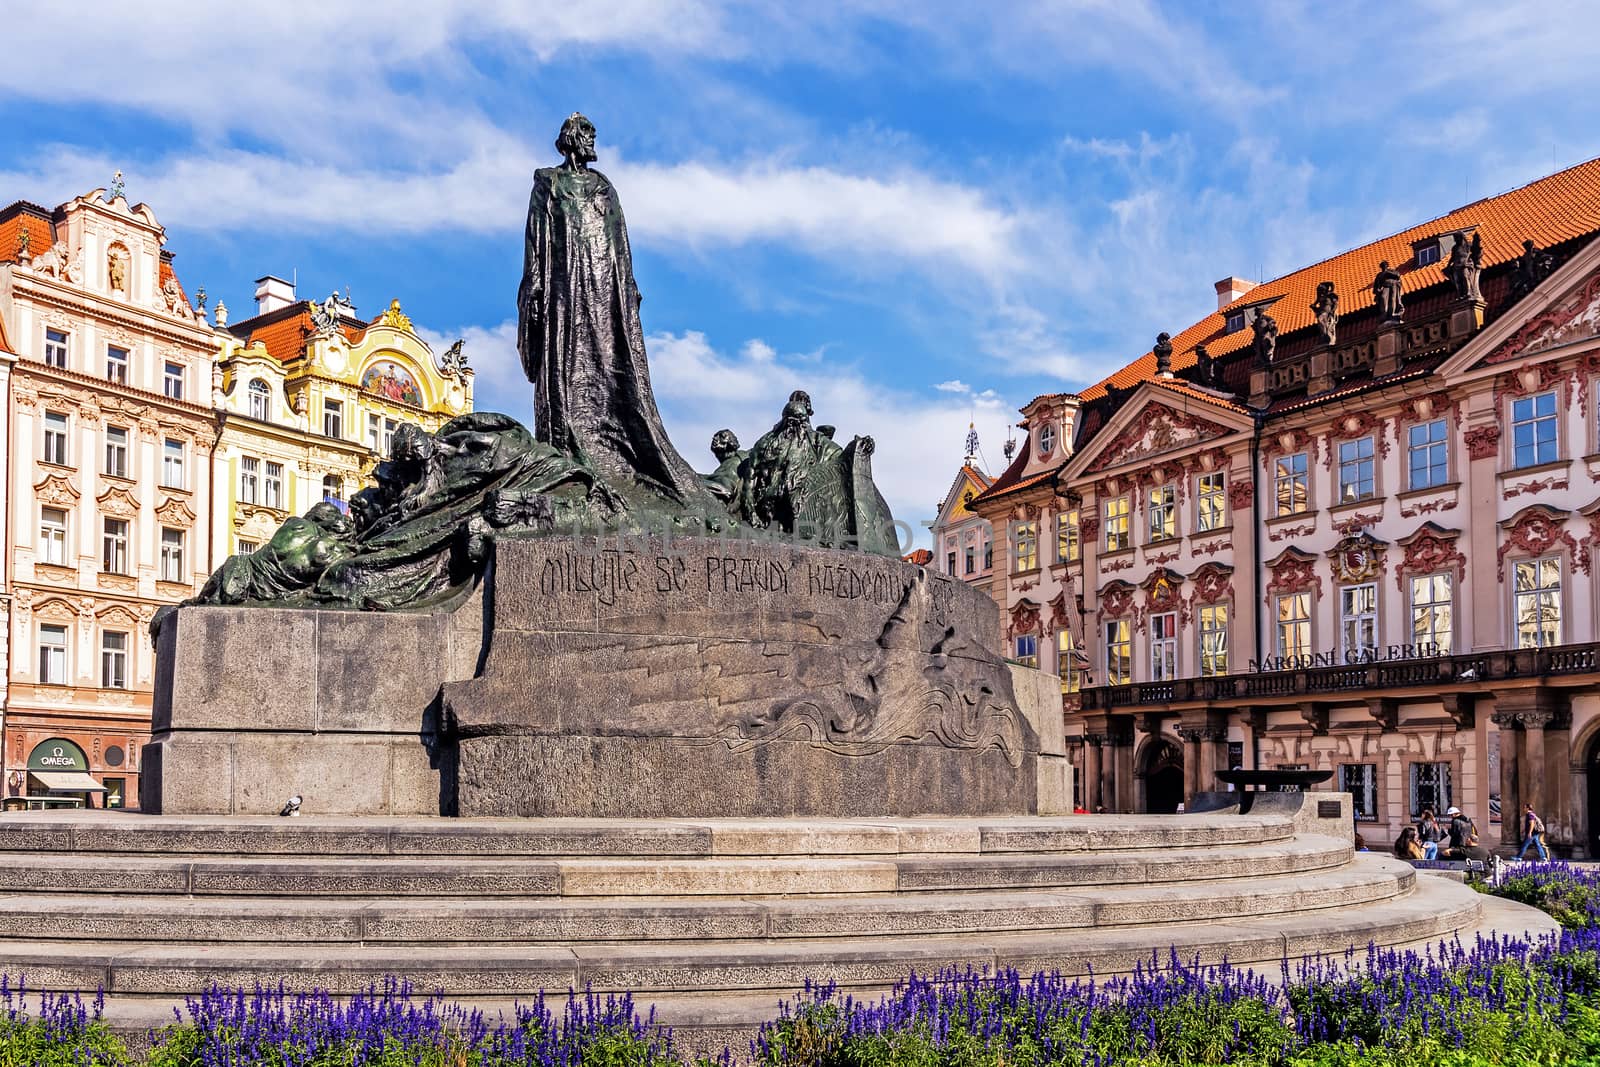 The Jan Hus Memorial in the Old Town Square in Prague, designed by Ladislav Saloun, unveiled in 1915 to commemorate the 500th anniversary of Jan Hus' martyrdom at the stake in 1415.